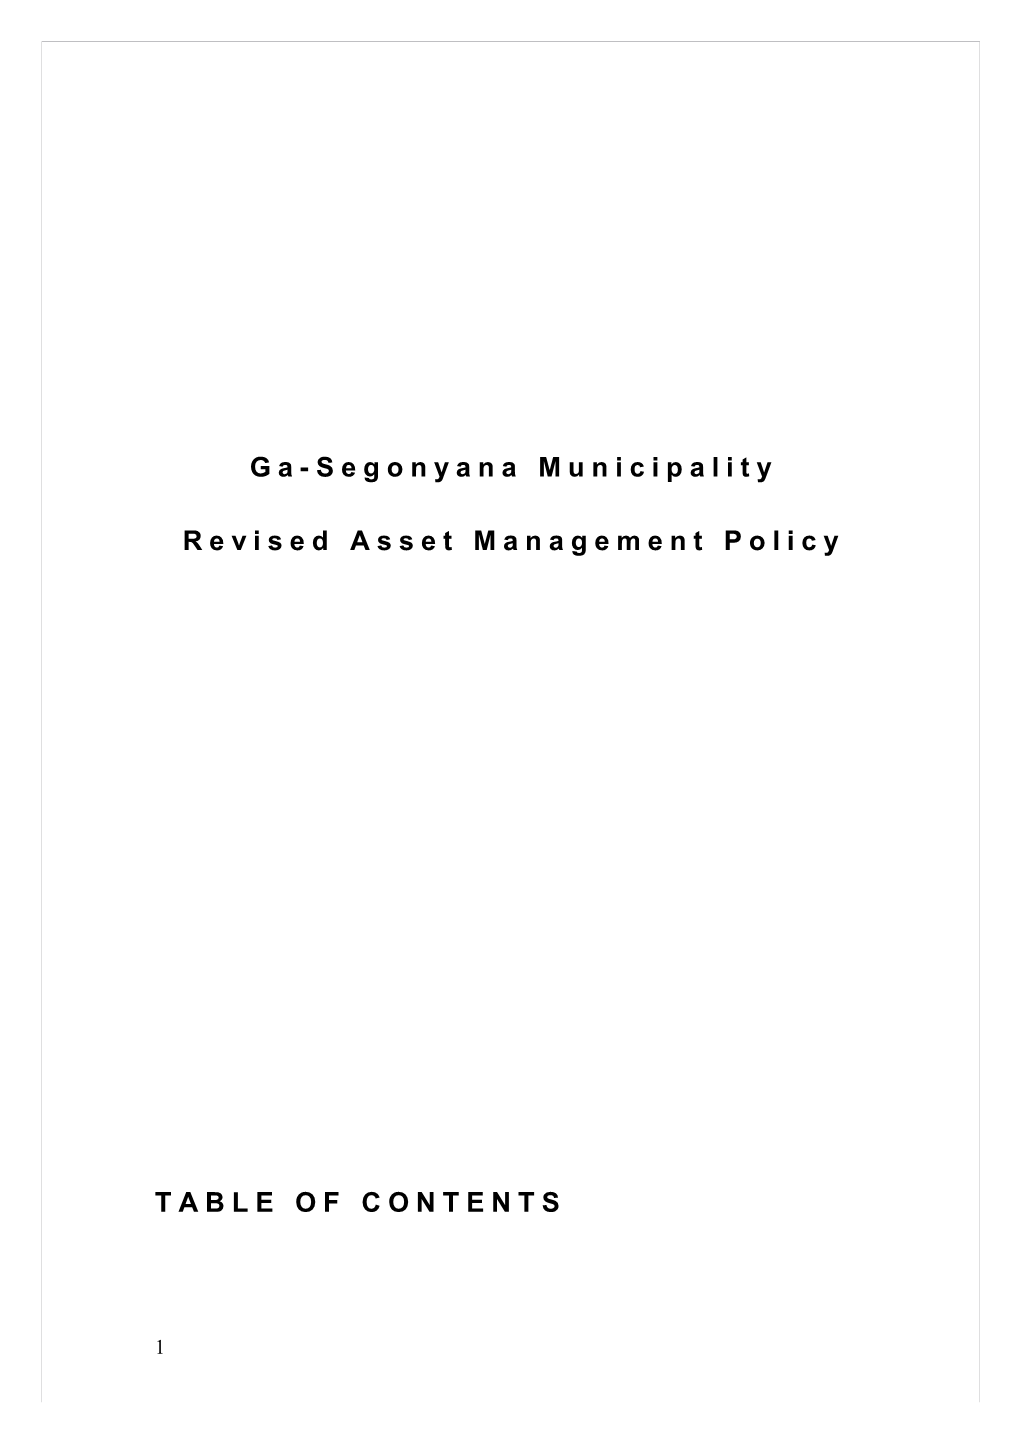 Asset and Risk Management Policy